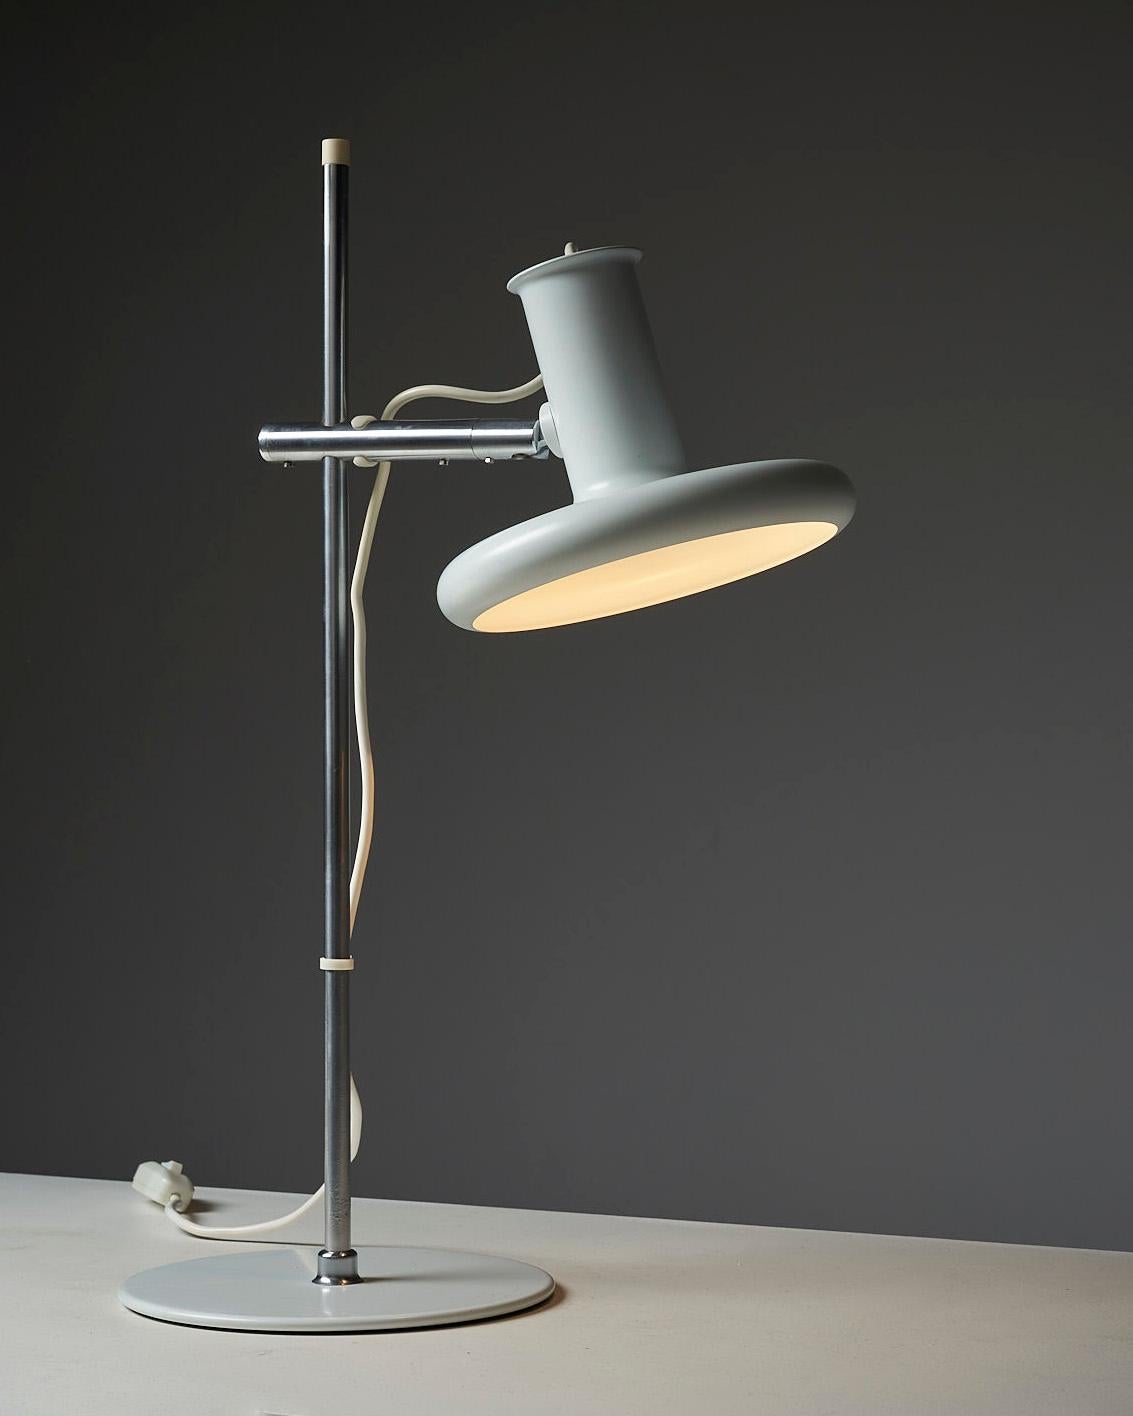 The Optima Lamp Series, designed by Hans Due for FOG&MØRUP, is a collection of futuristic-looking lamps that have become a design classic. This table lamp features a tin white base with a chromed stem, topped by the adjustable lampshade that is